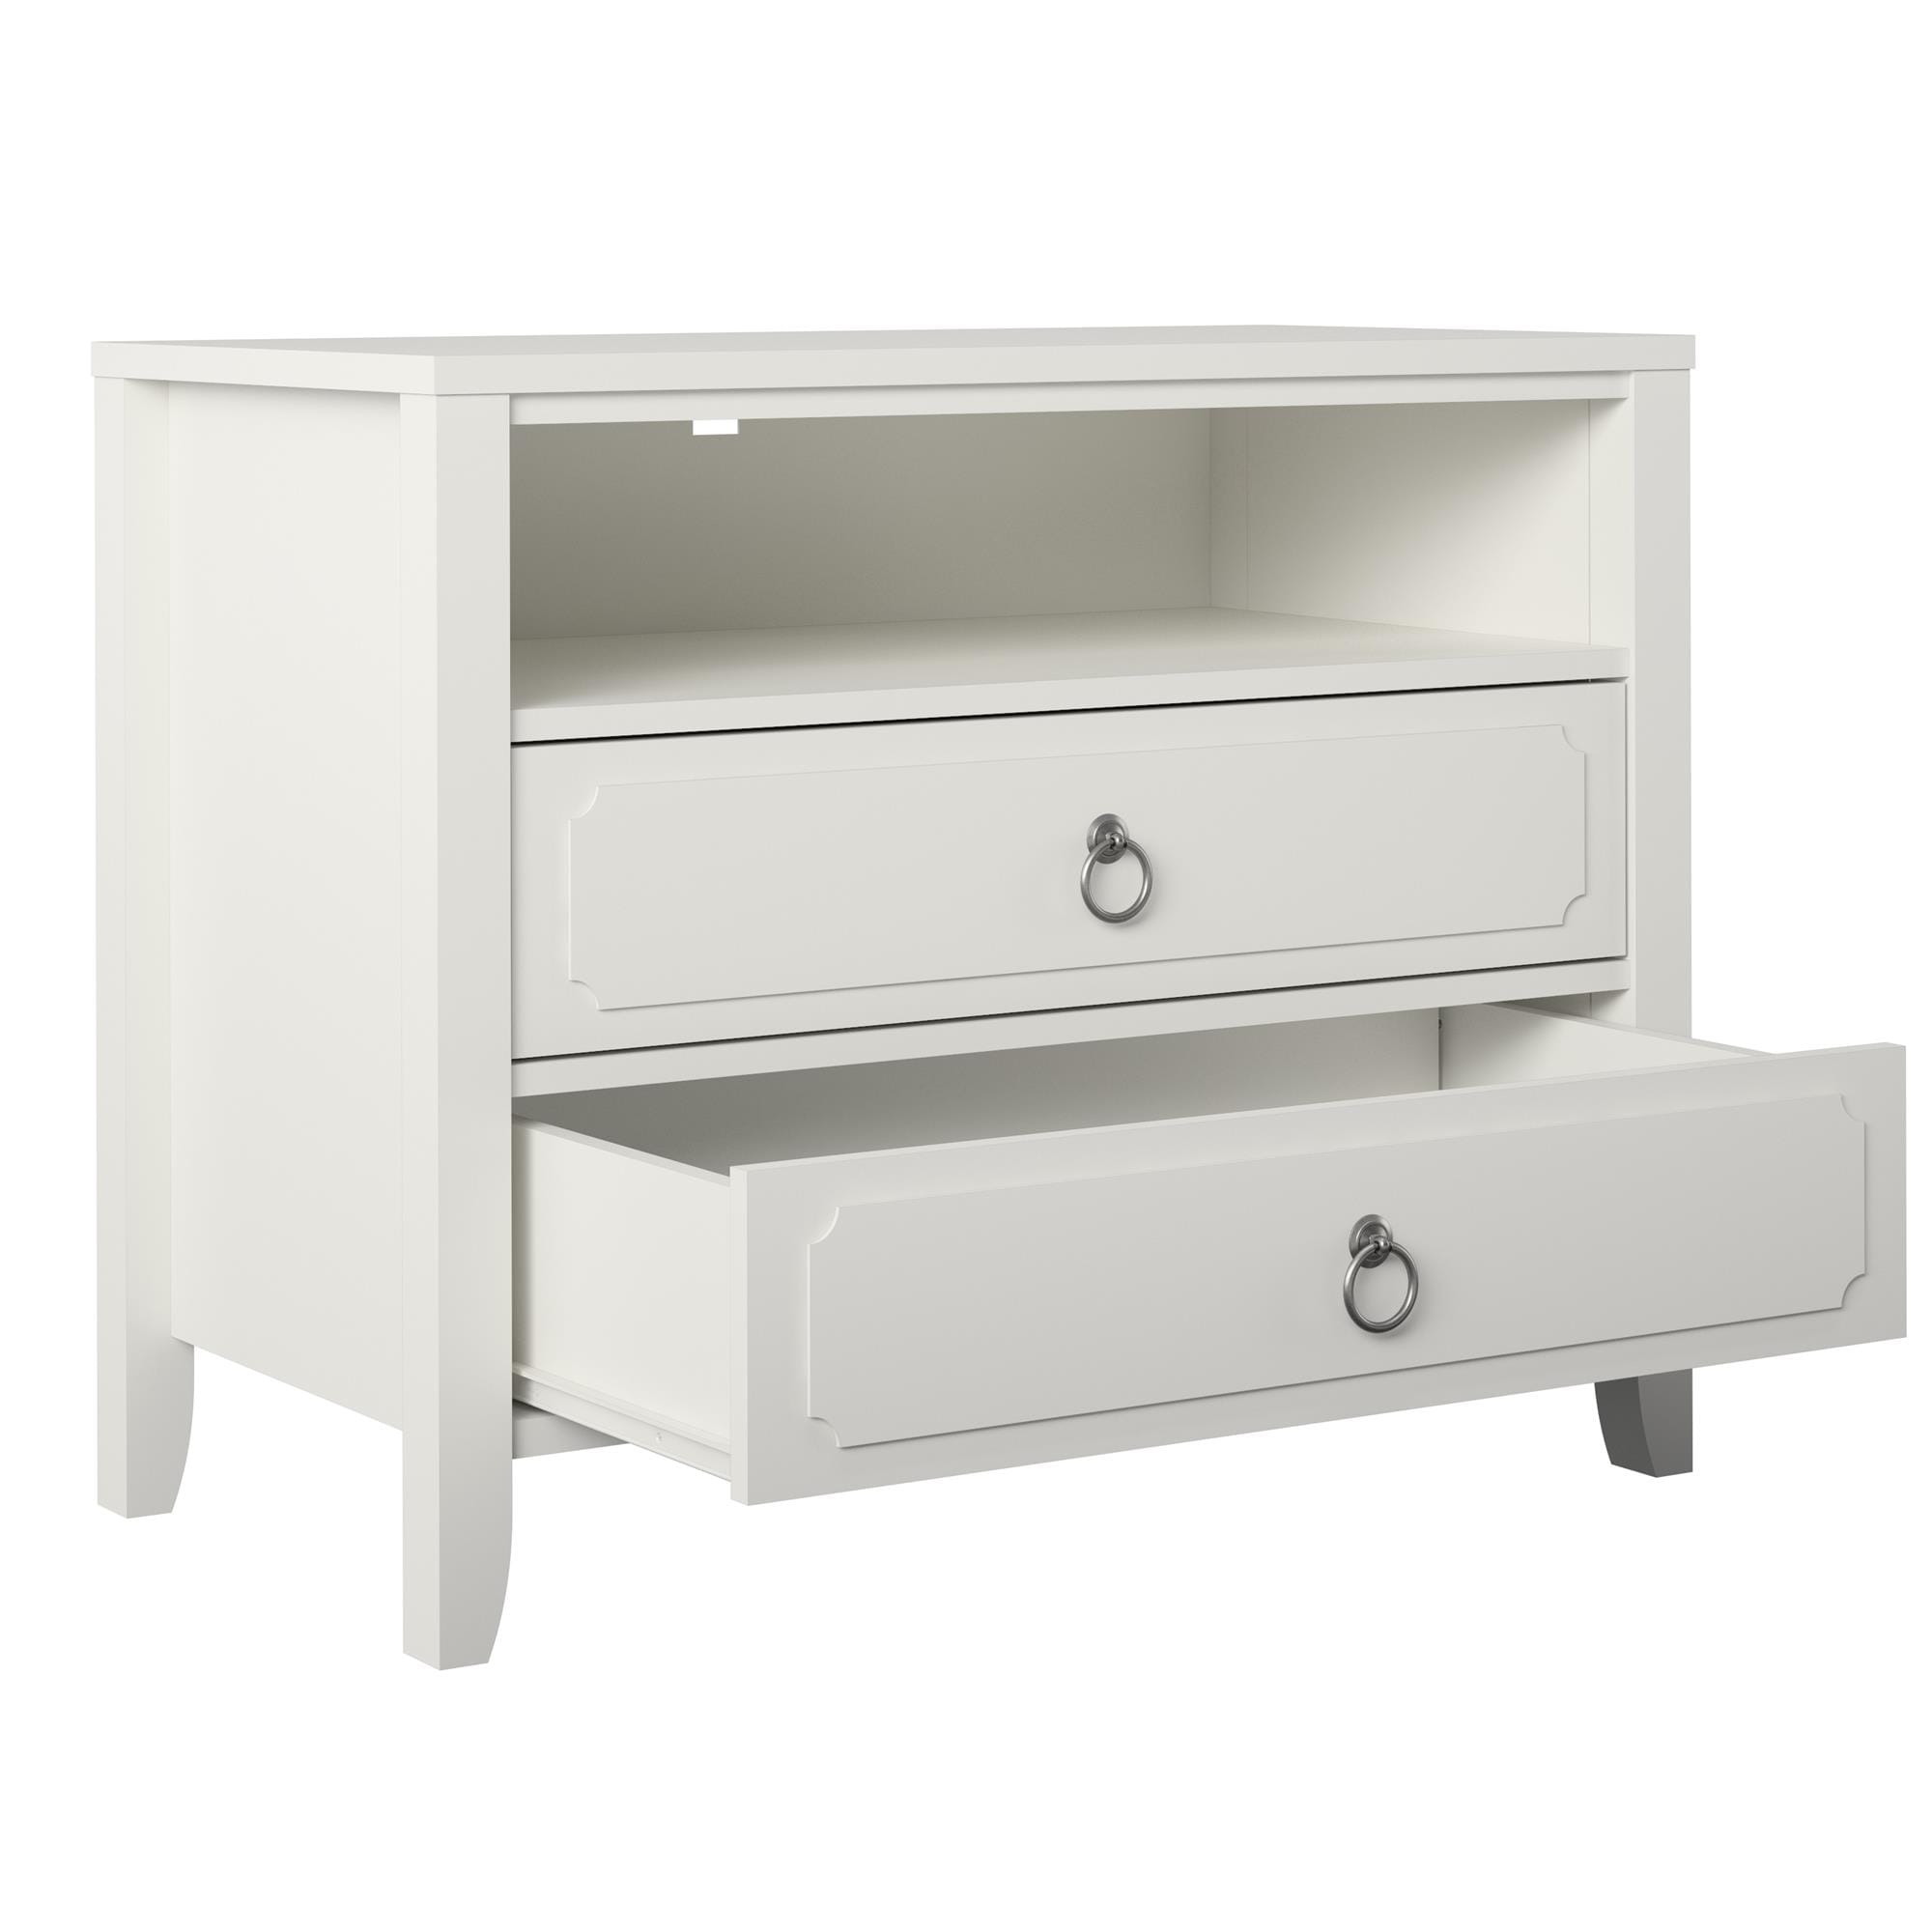 Ameriwood Home Her Majesty 2 Drawer Nightstand, Soft White in the